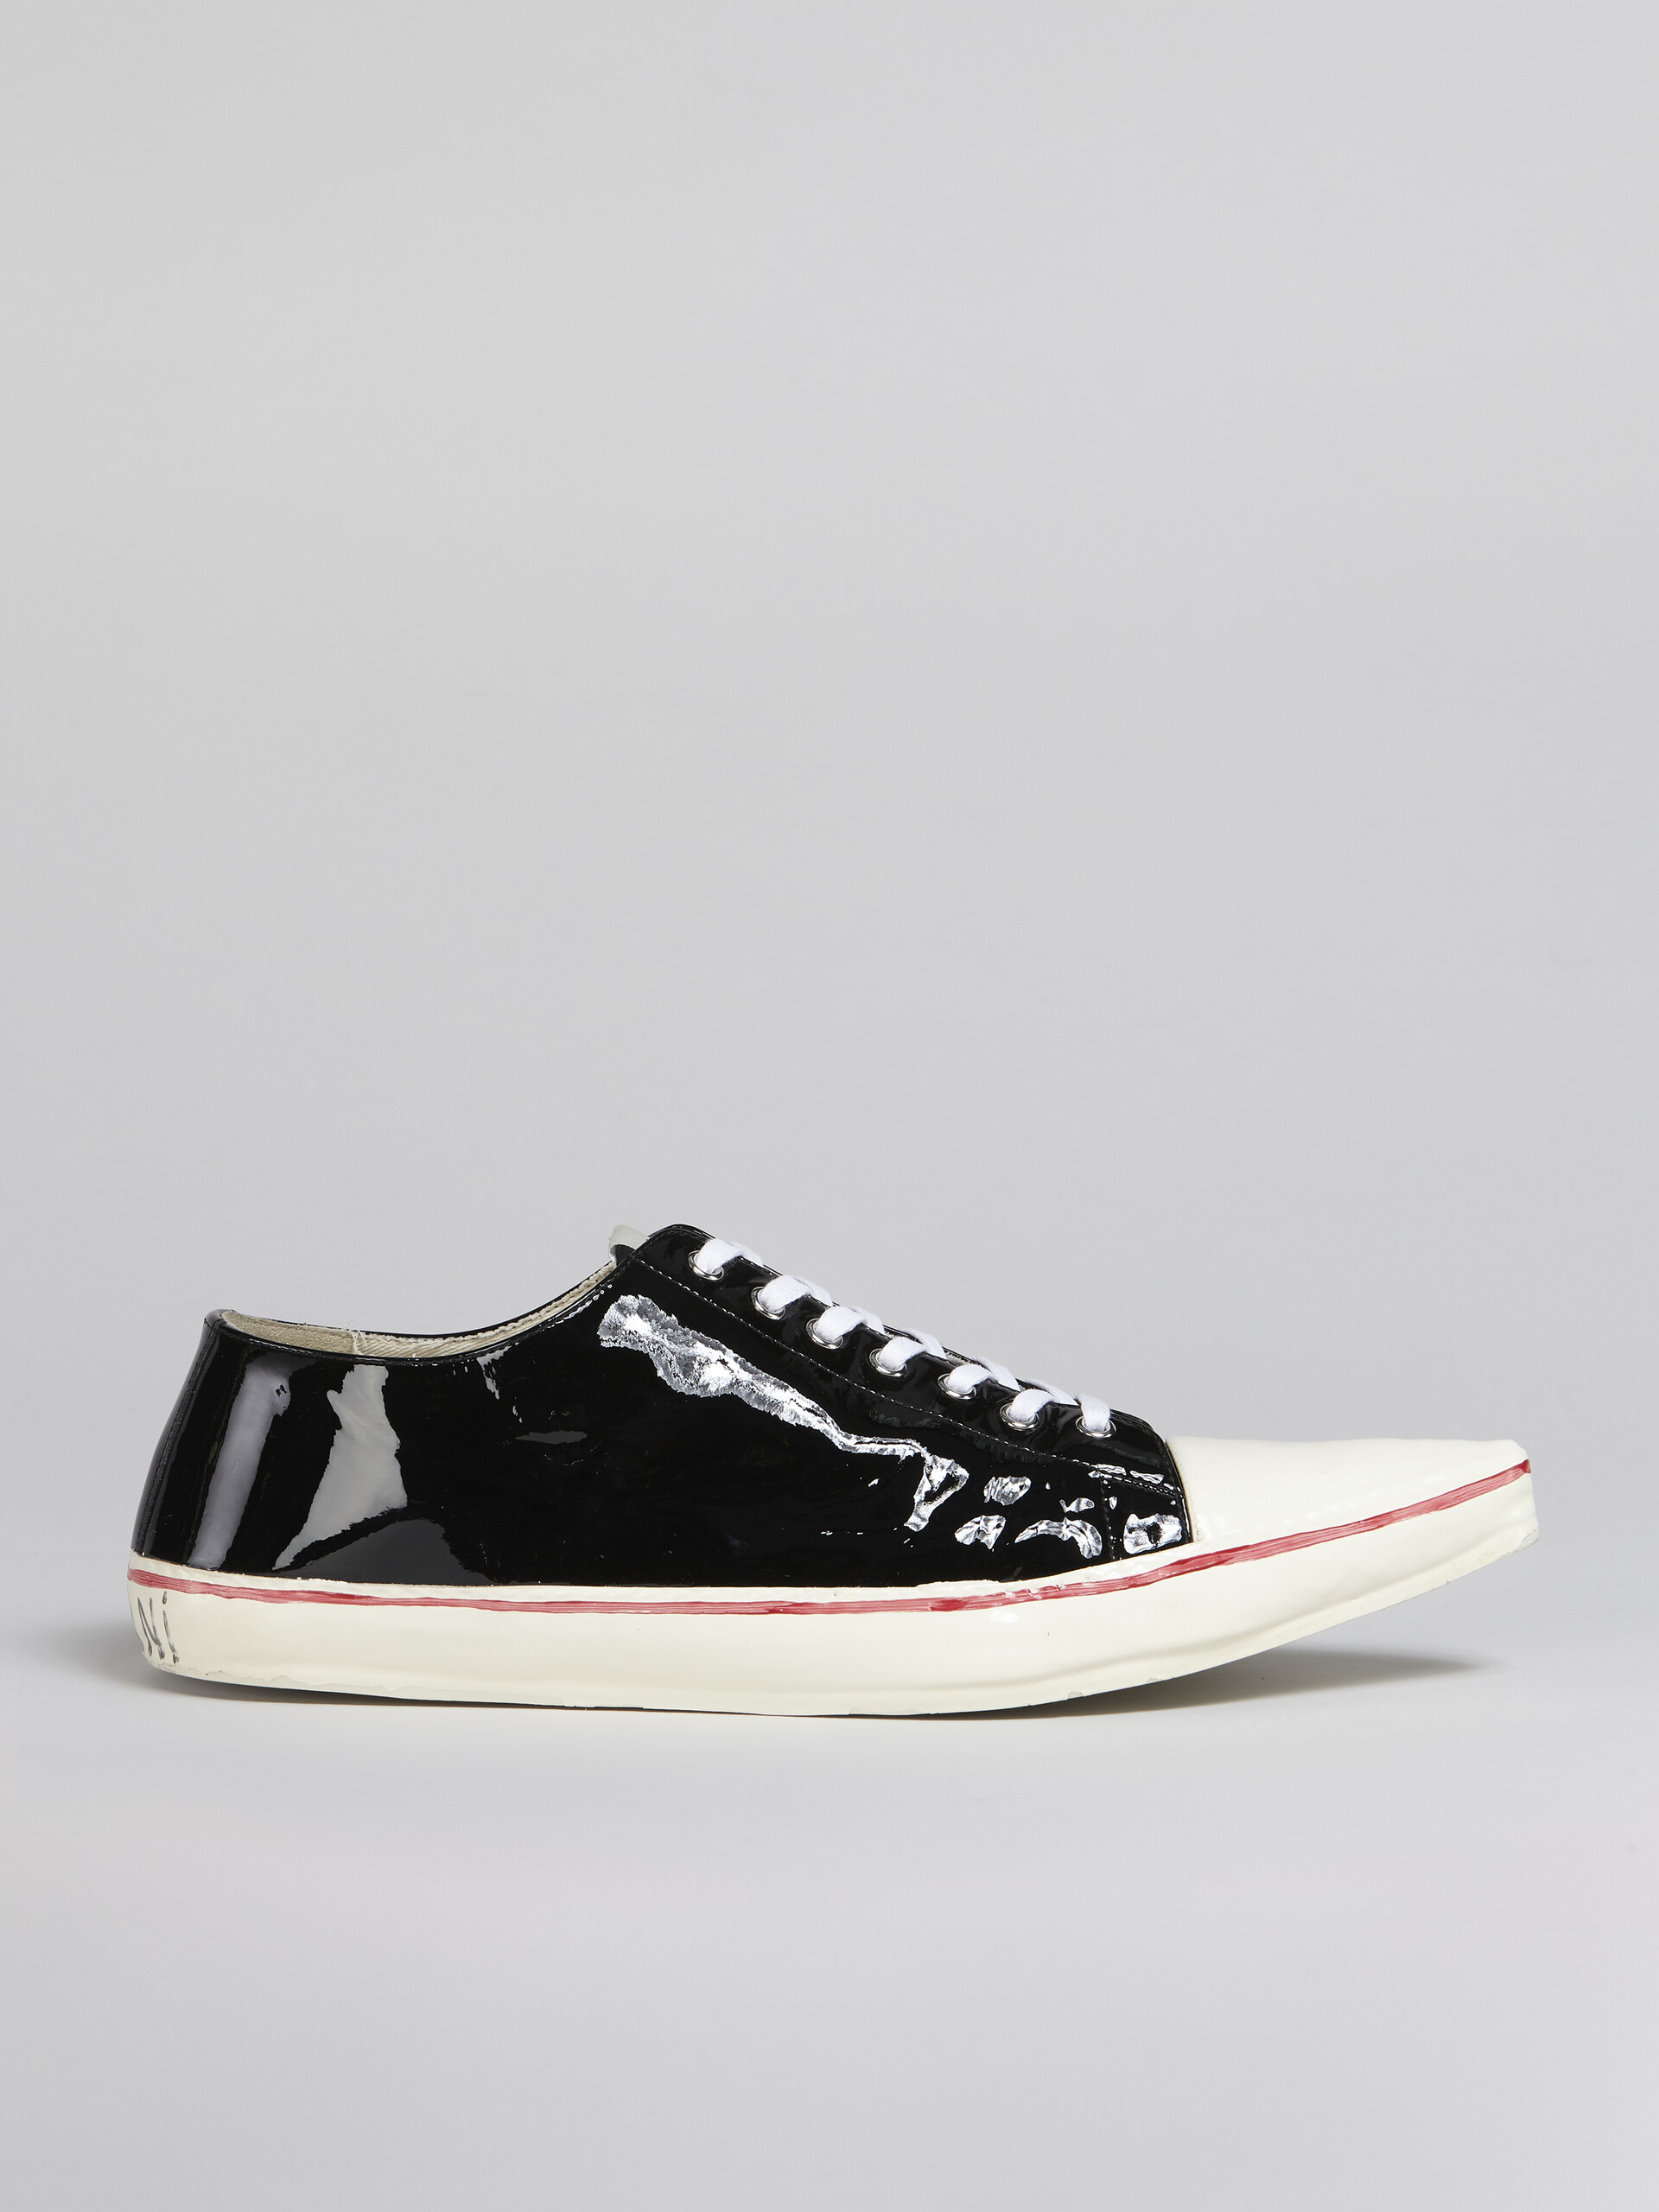 Patent leather GOOEY low-top sneaker - Sneakers - Image 1